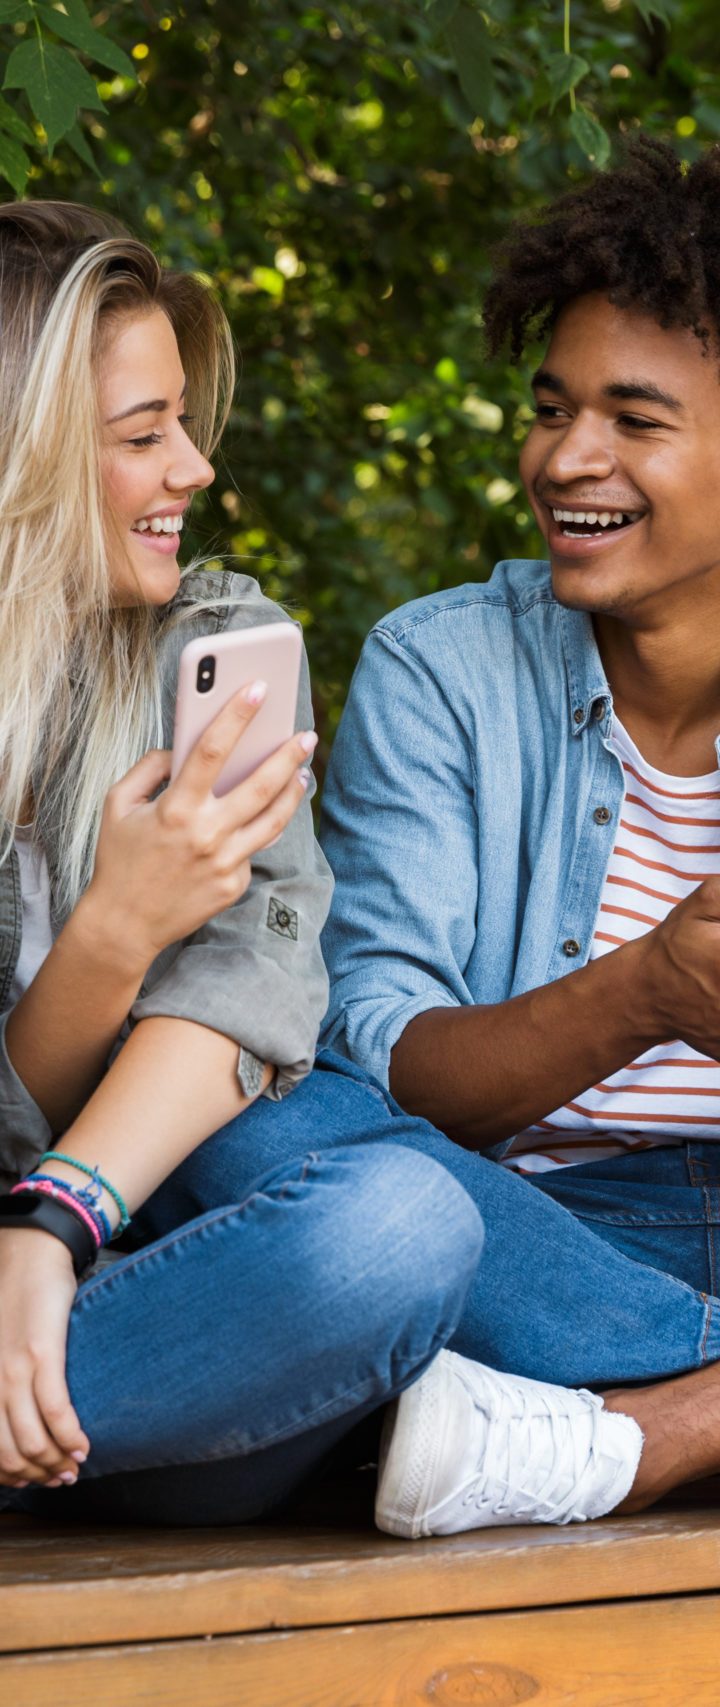 Image of excited emotional young loving couple using mobile phone outdoors in park.